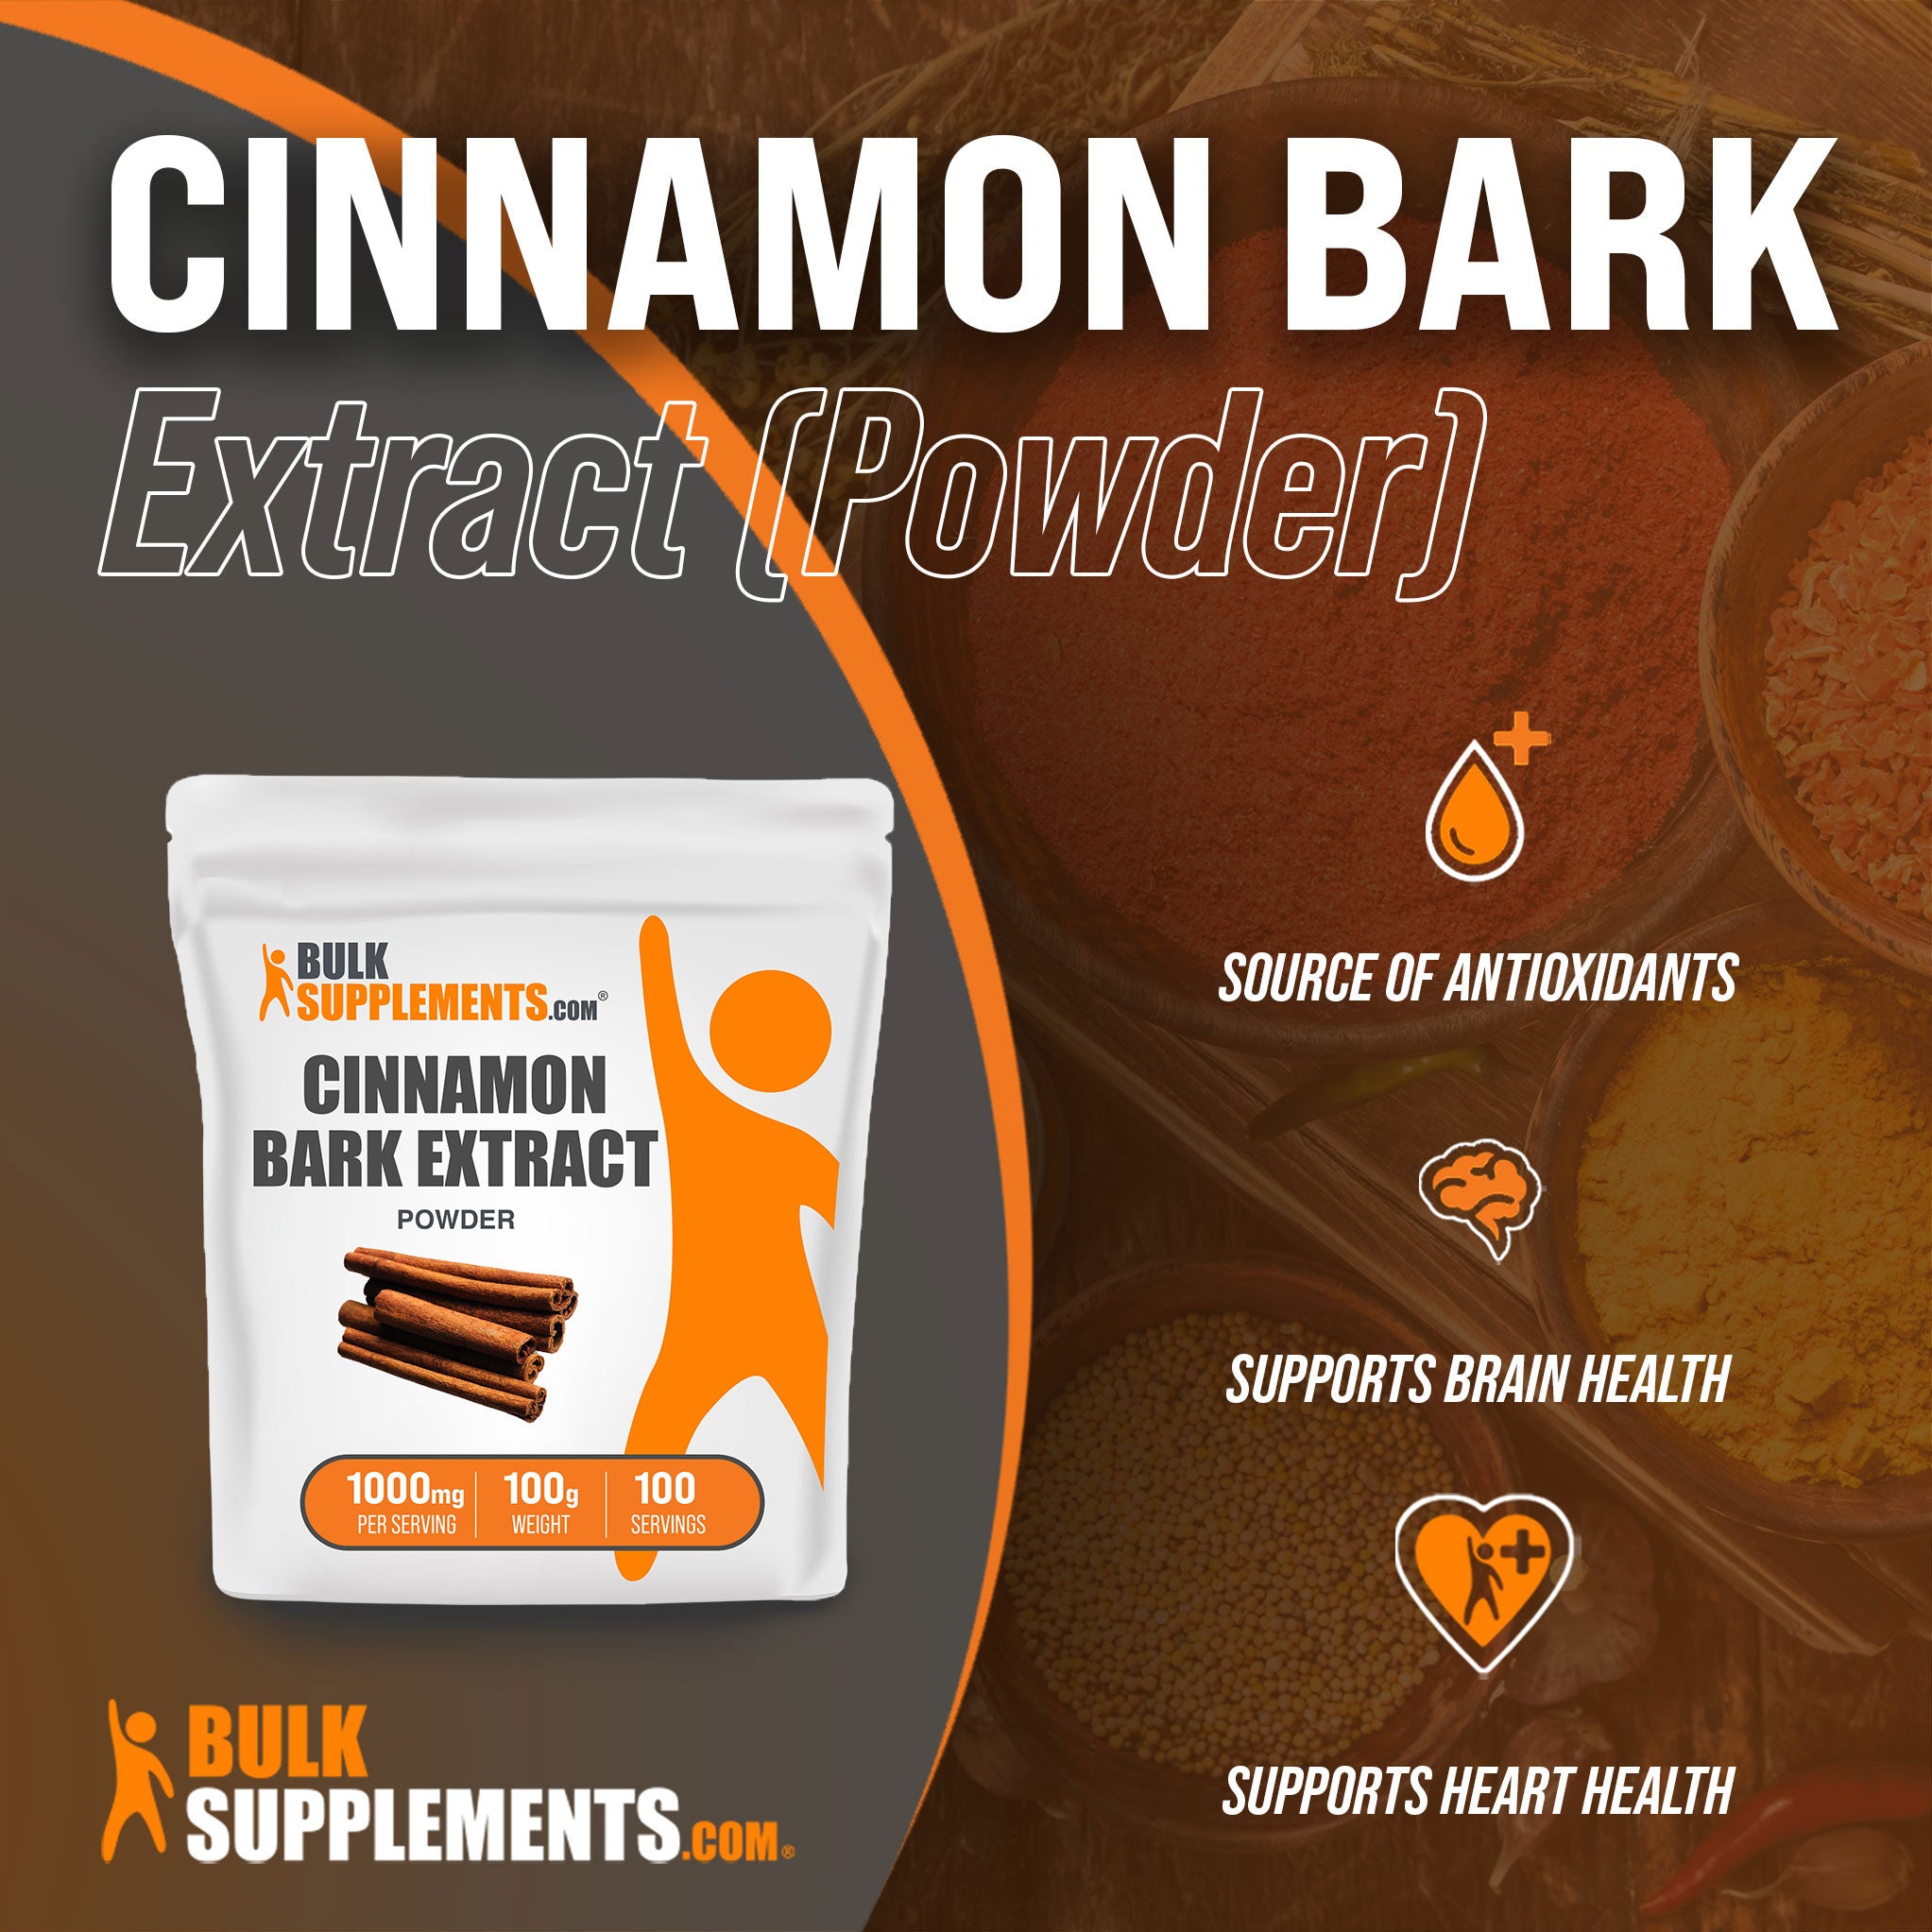 Benefits of Cinnamon Bark Extract; source of antioxidants, supports brain health, supports heart health